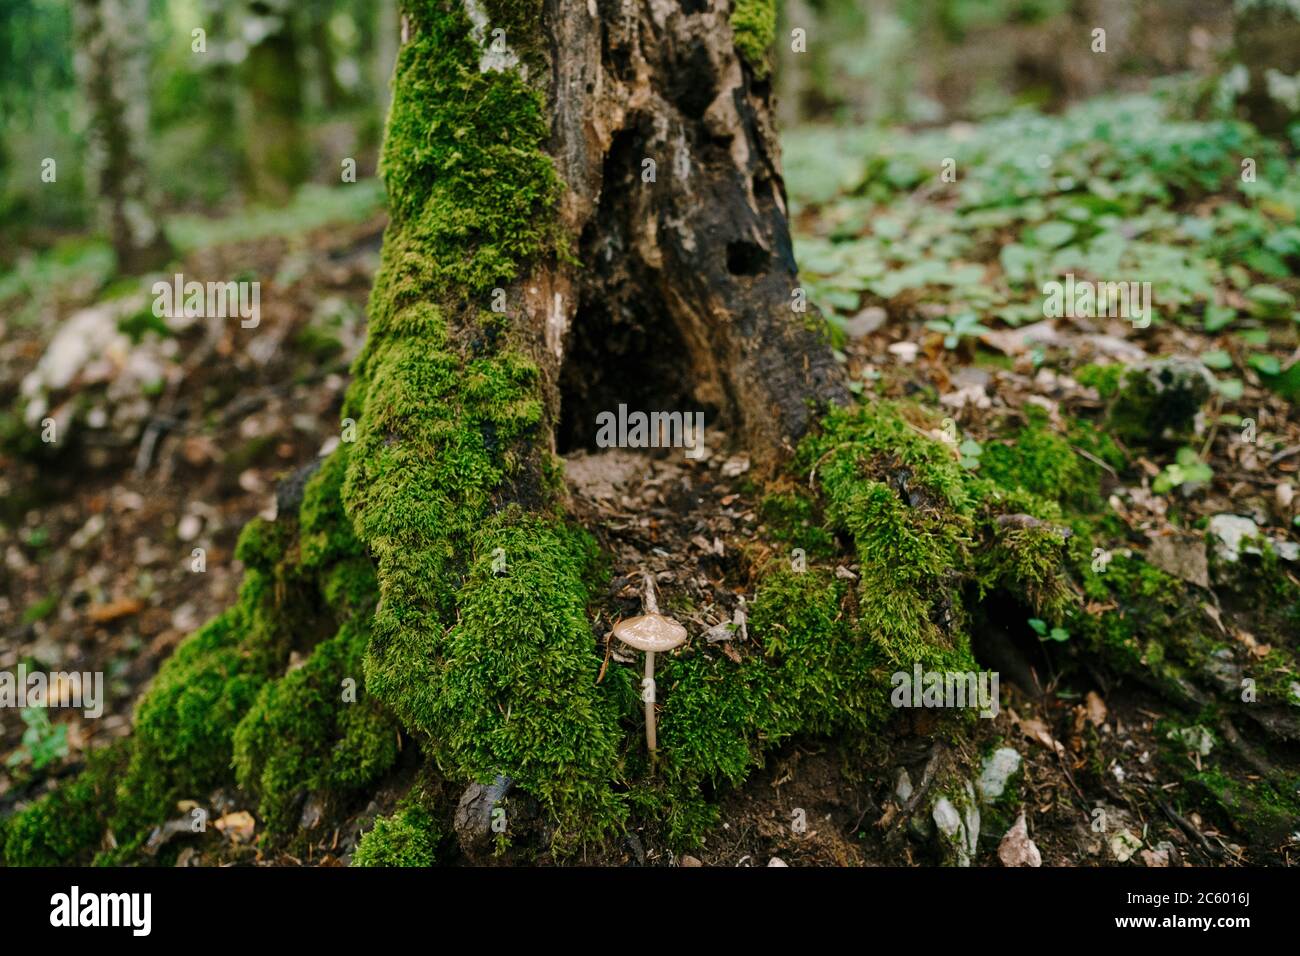 Toadstool mushroom near a rotten stump overgrown with moss in the forest. Stock Photo